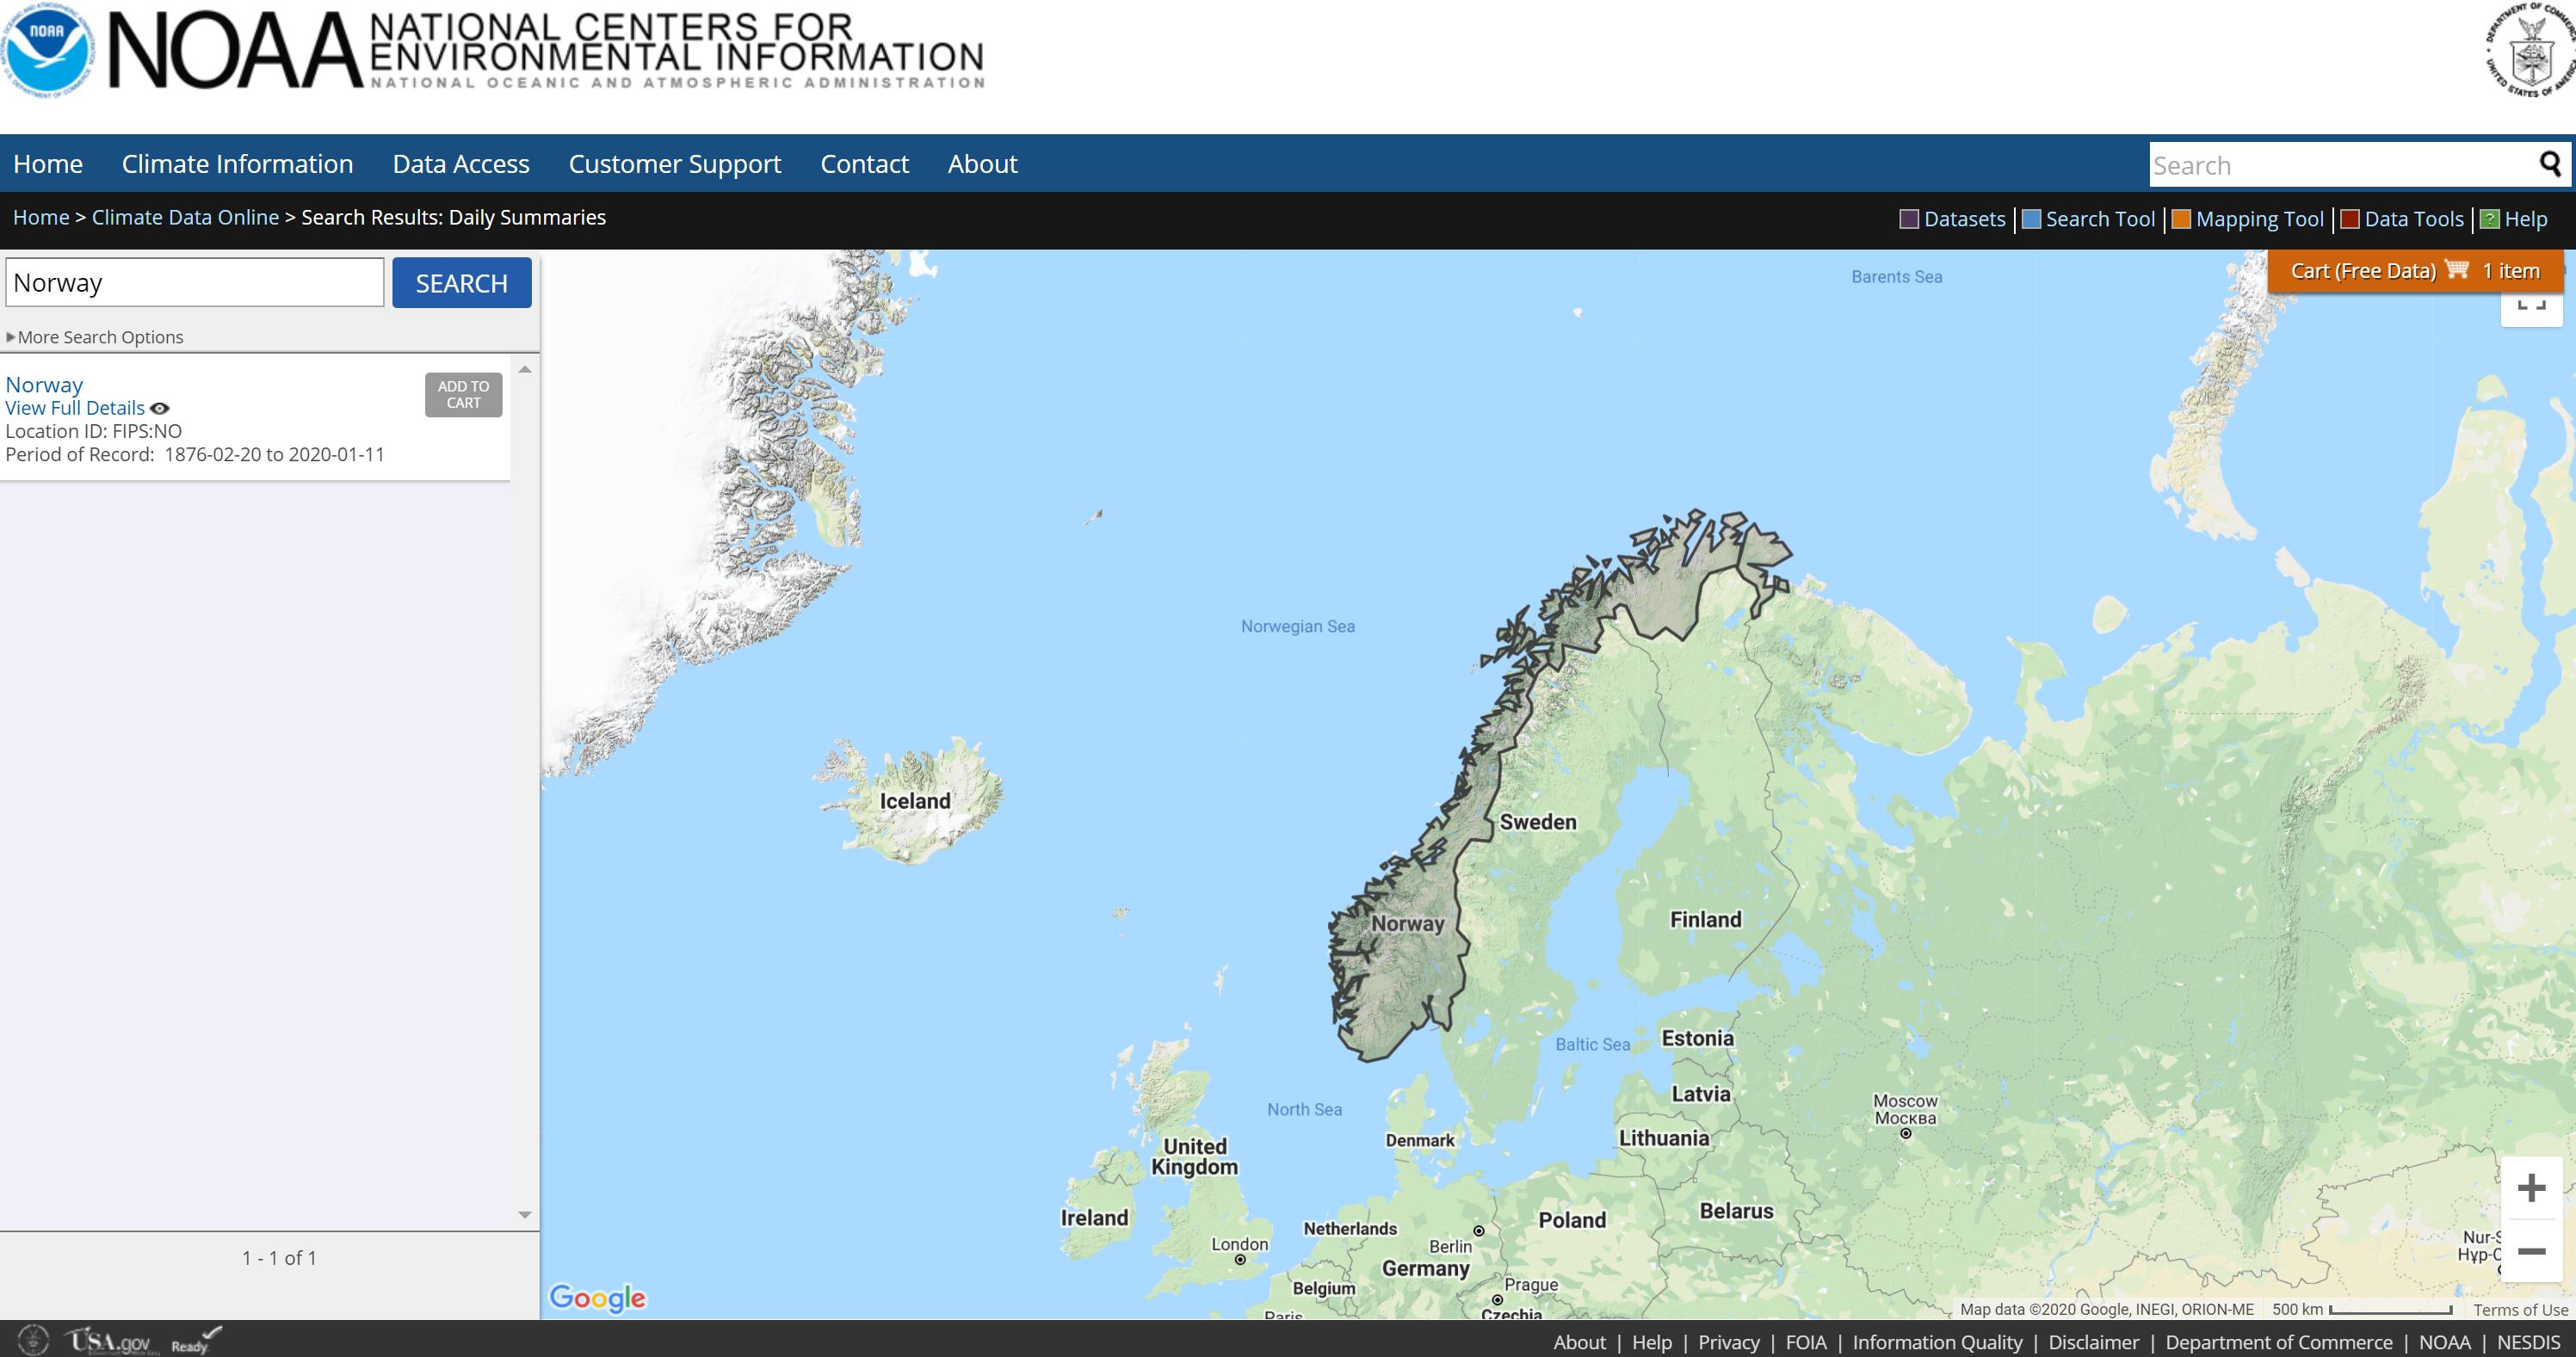 Screenshot of the filtering result page. In the top-left corner, the result of Norway with an ADD TO CART button shows up. A map with Norway shaded appears in the center of the screen. In the upper-right corner of the map, there is the Cart (Free Data).